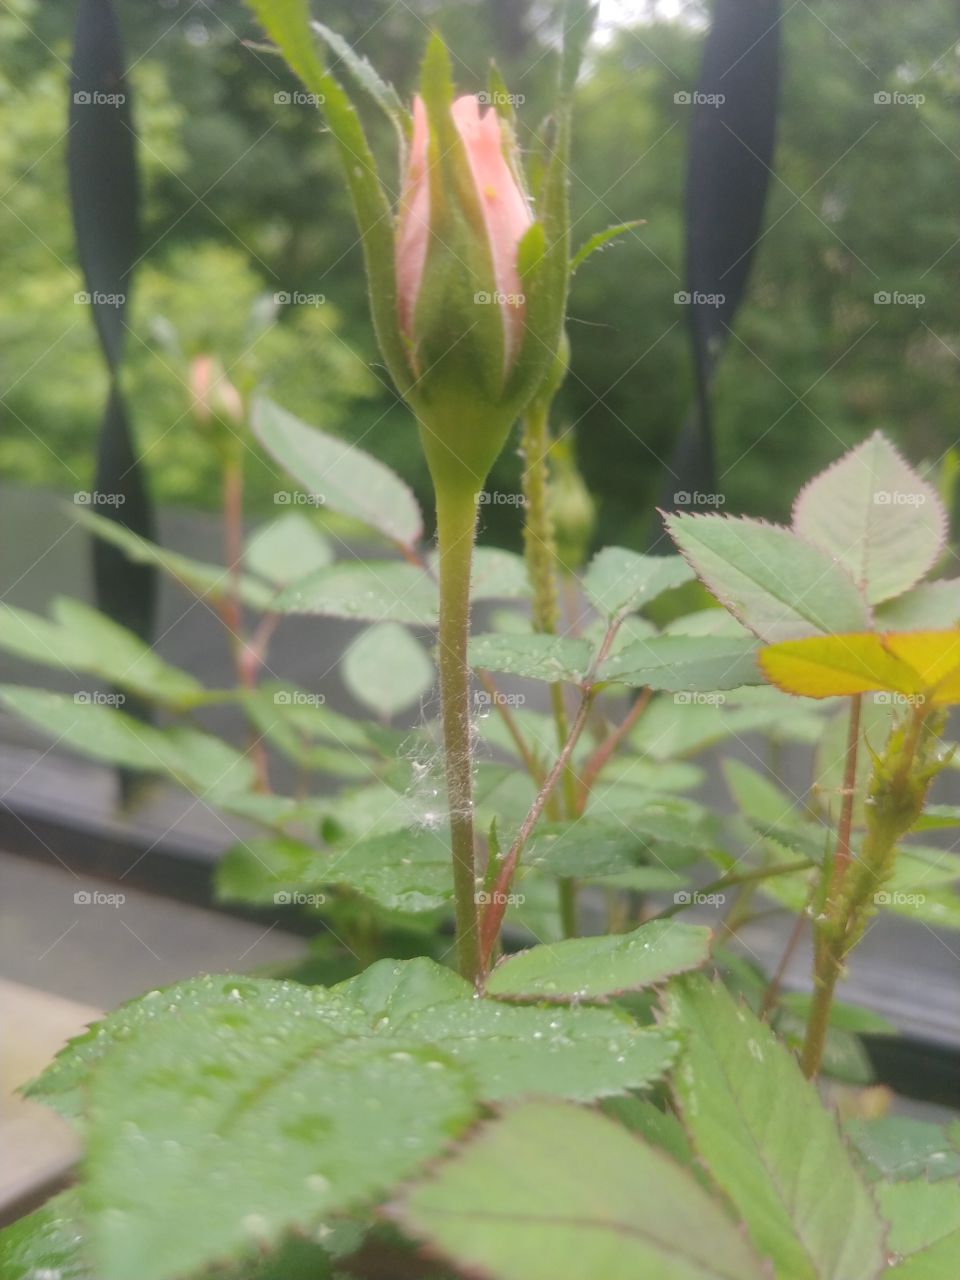 the rose bud i found on the roses o. the porch. one plant has a lot of buds the other has two.